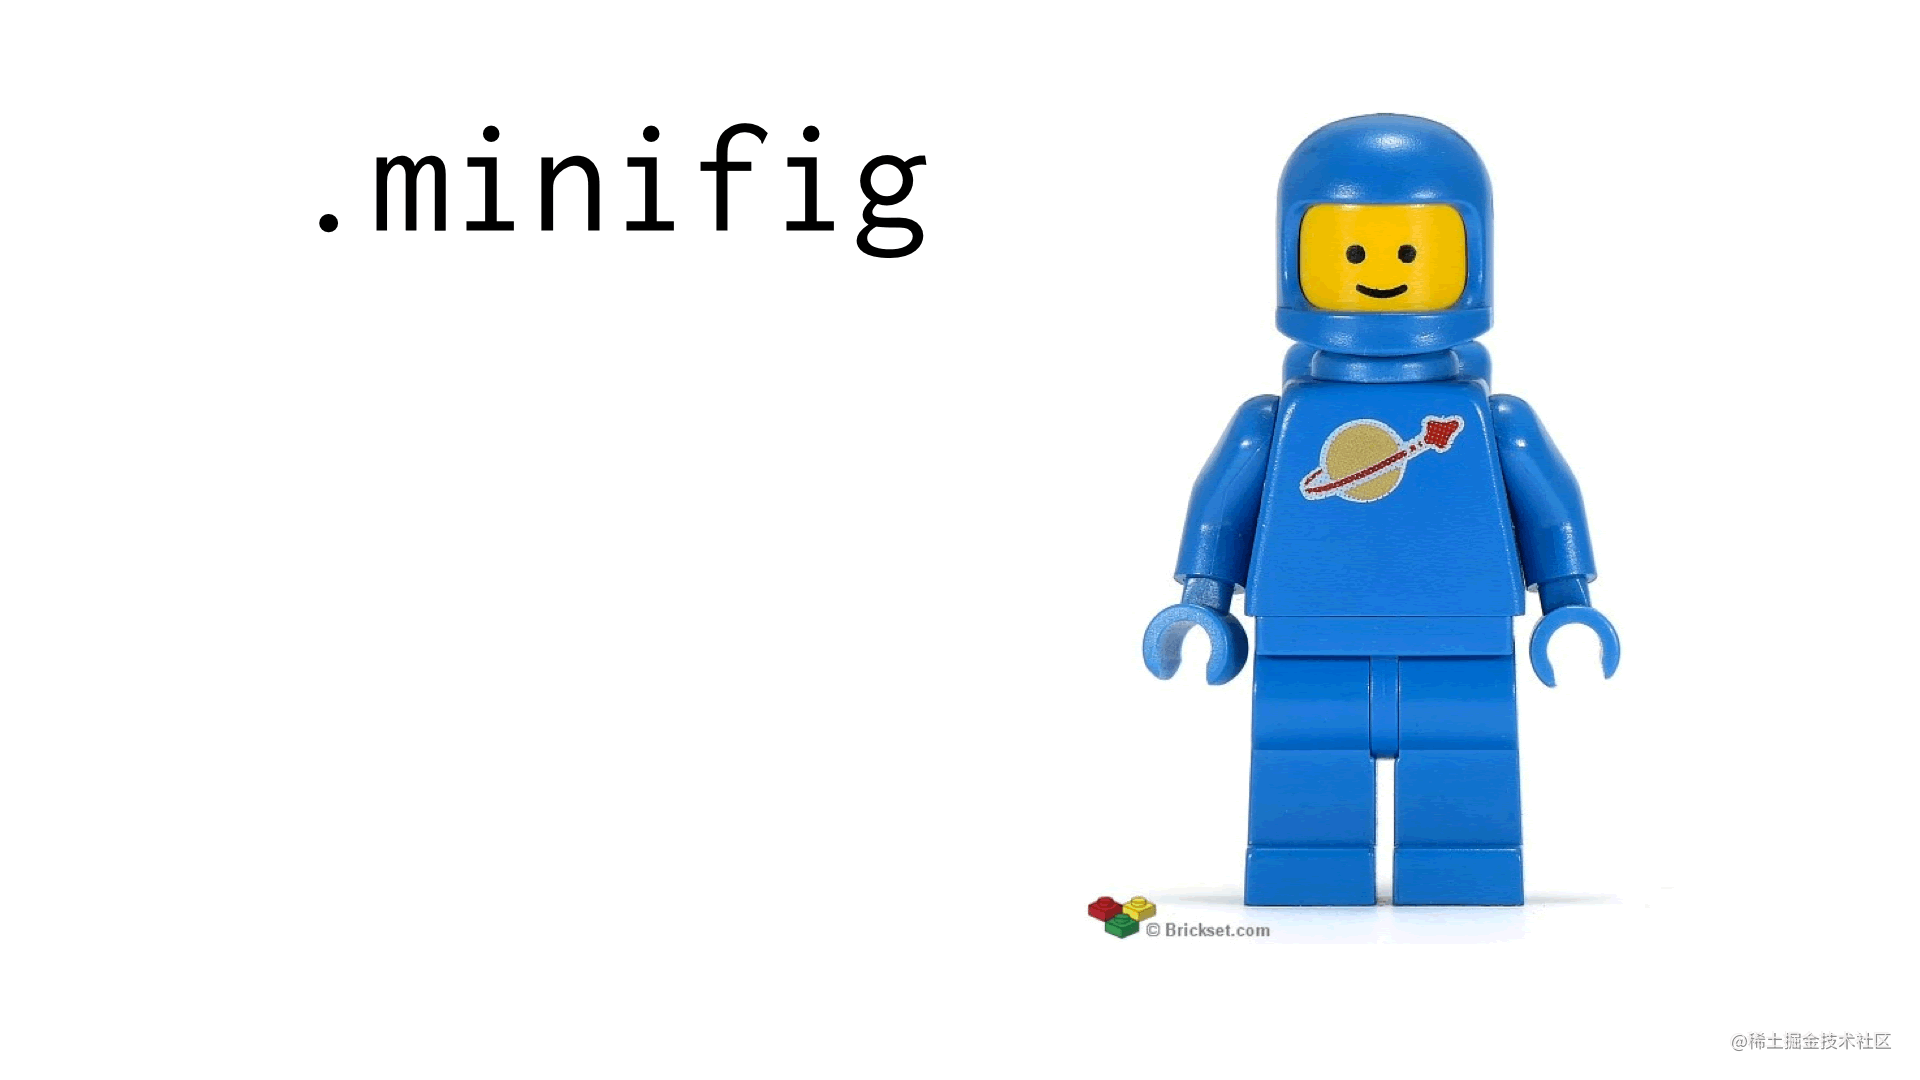 Example of .minifig to indicate a lego minifig